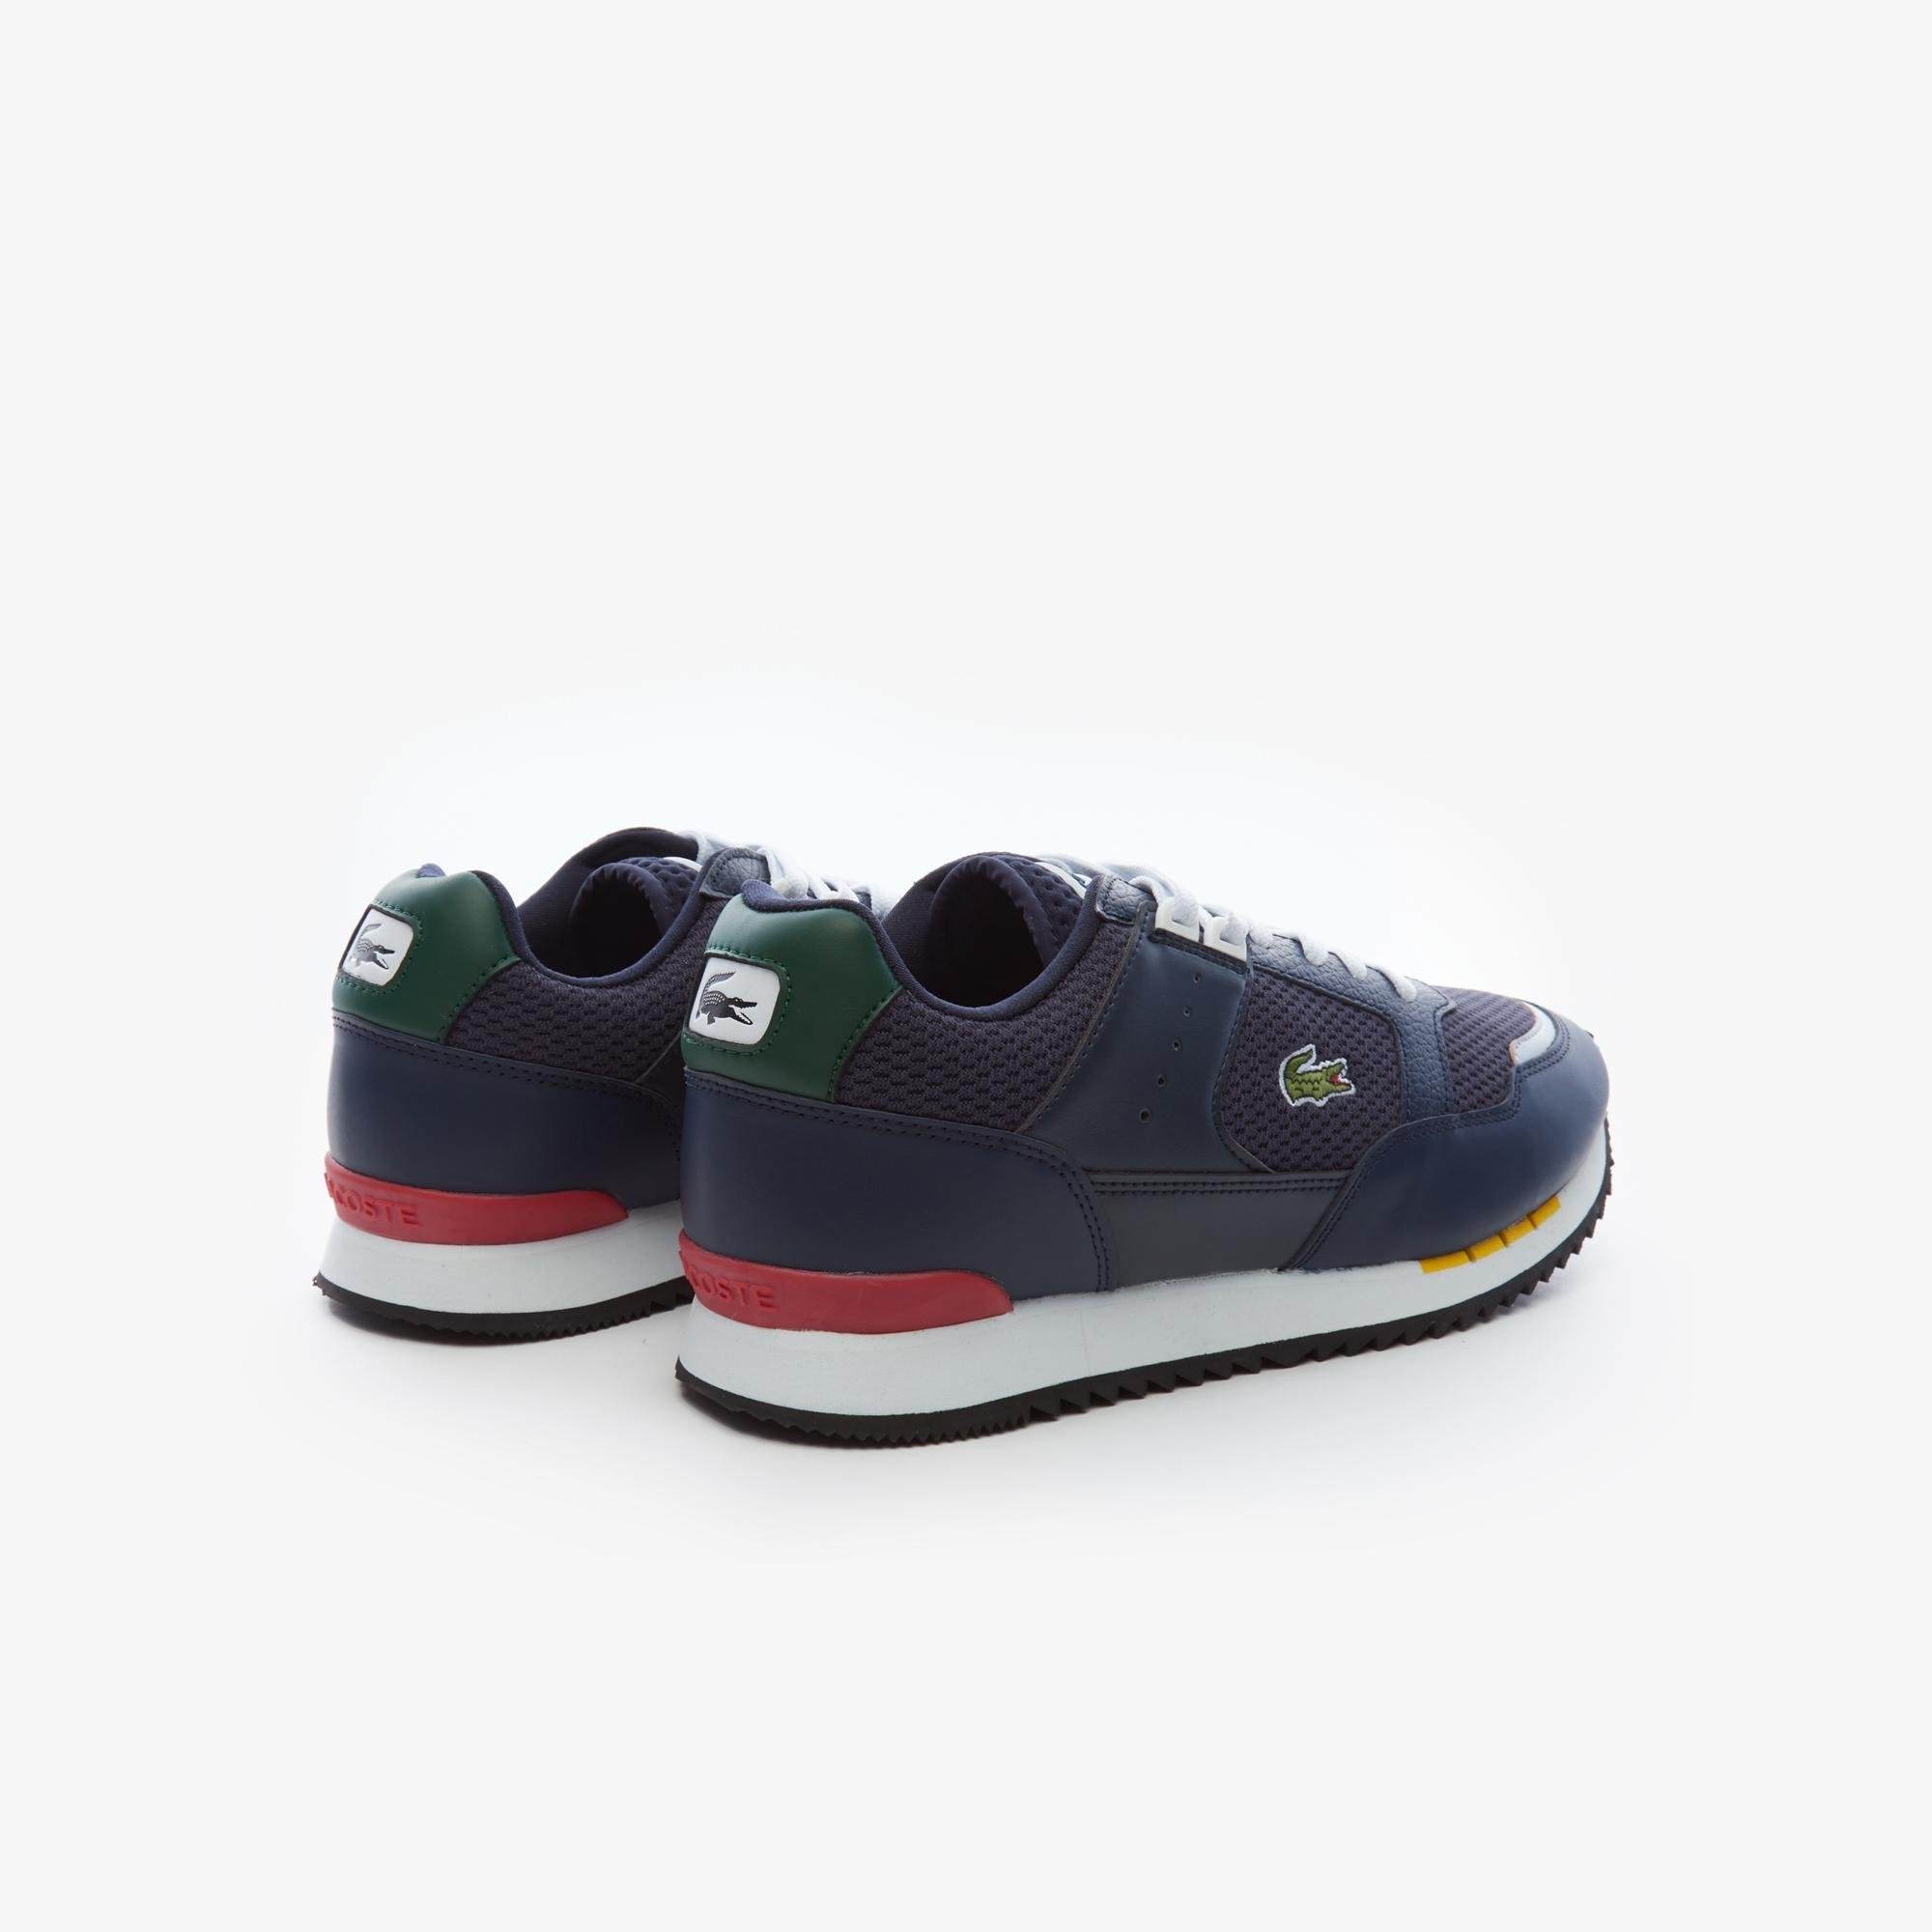 Lacoste Men's Partner Piste Textile and Leather Trainers